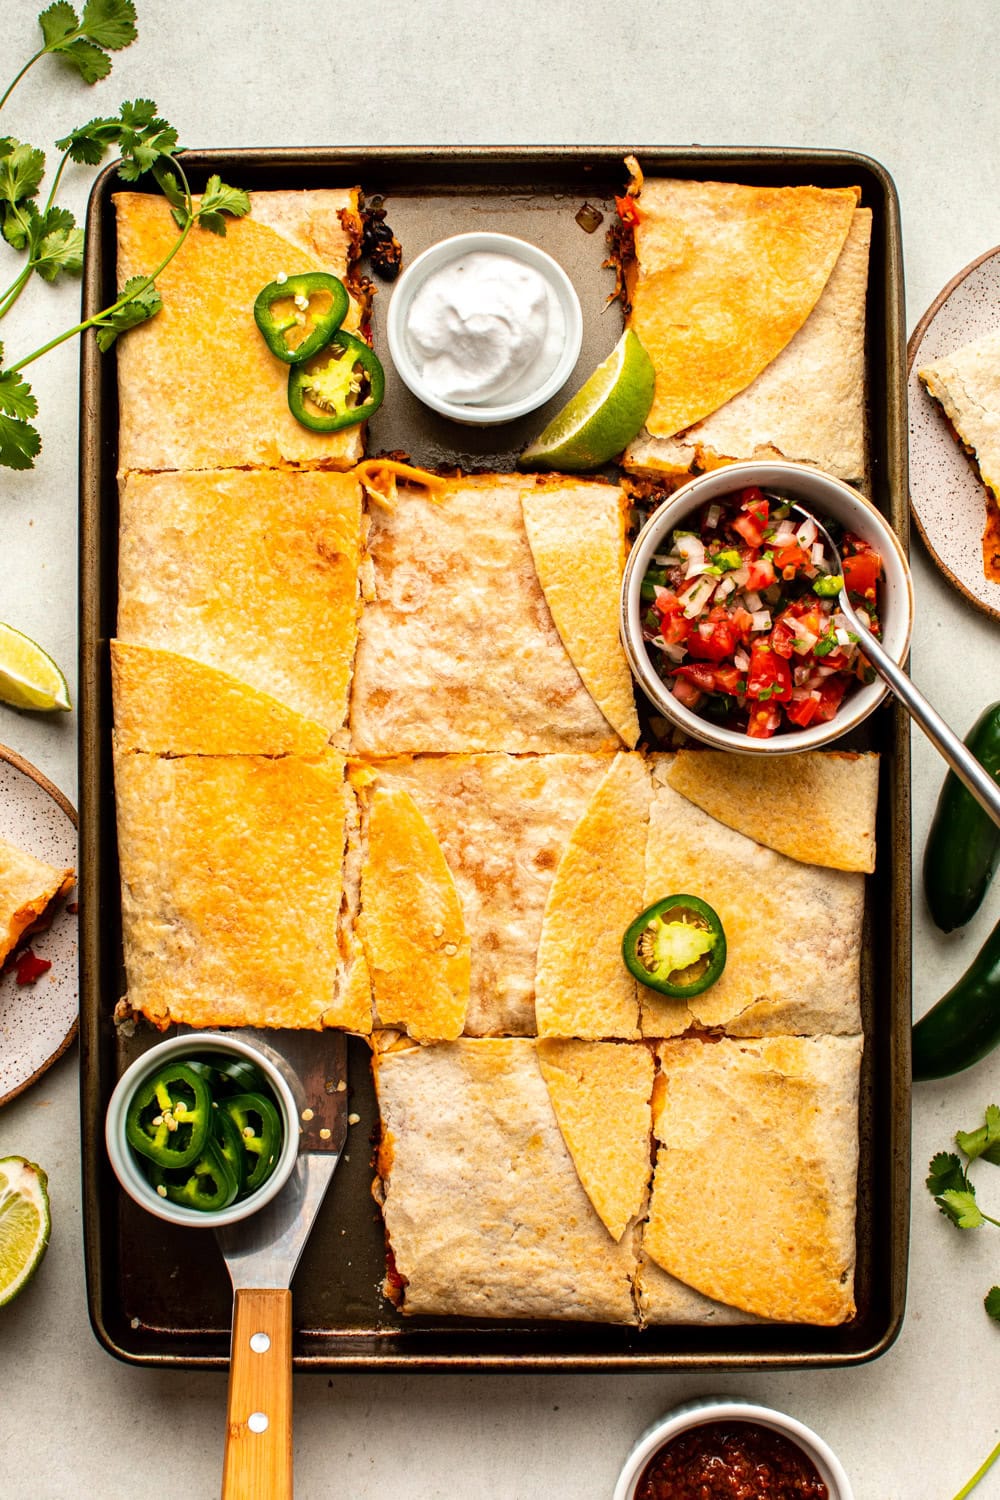 a photo of the baked quesadilla served in a baking tray topped with small bowls of salsa and sliced jalapenos placed on the empty corners of the tray